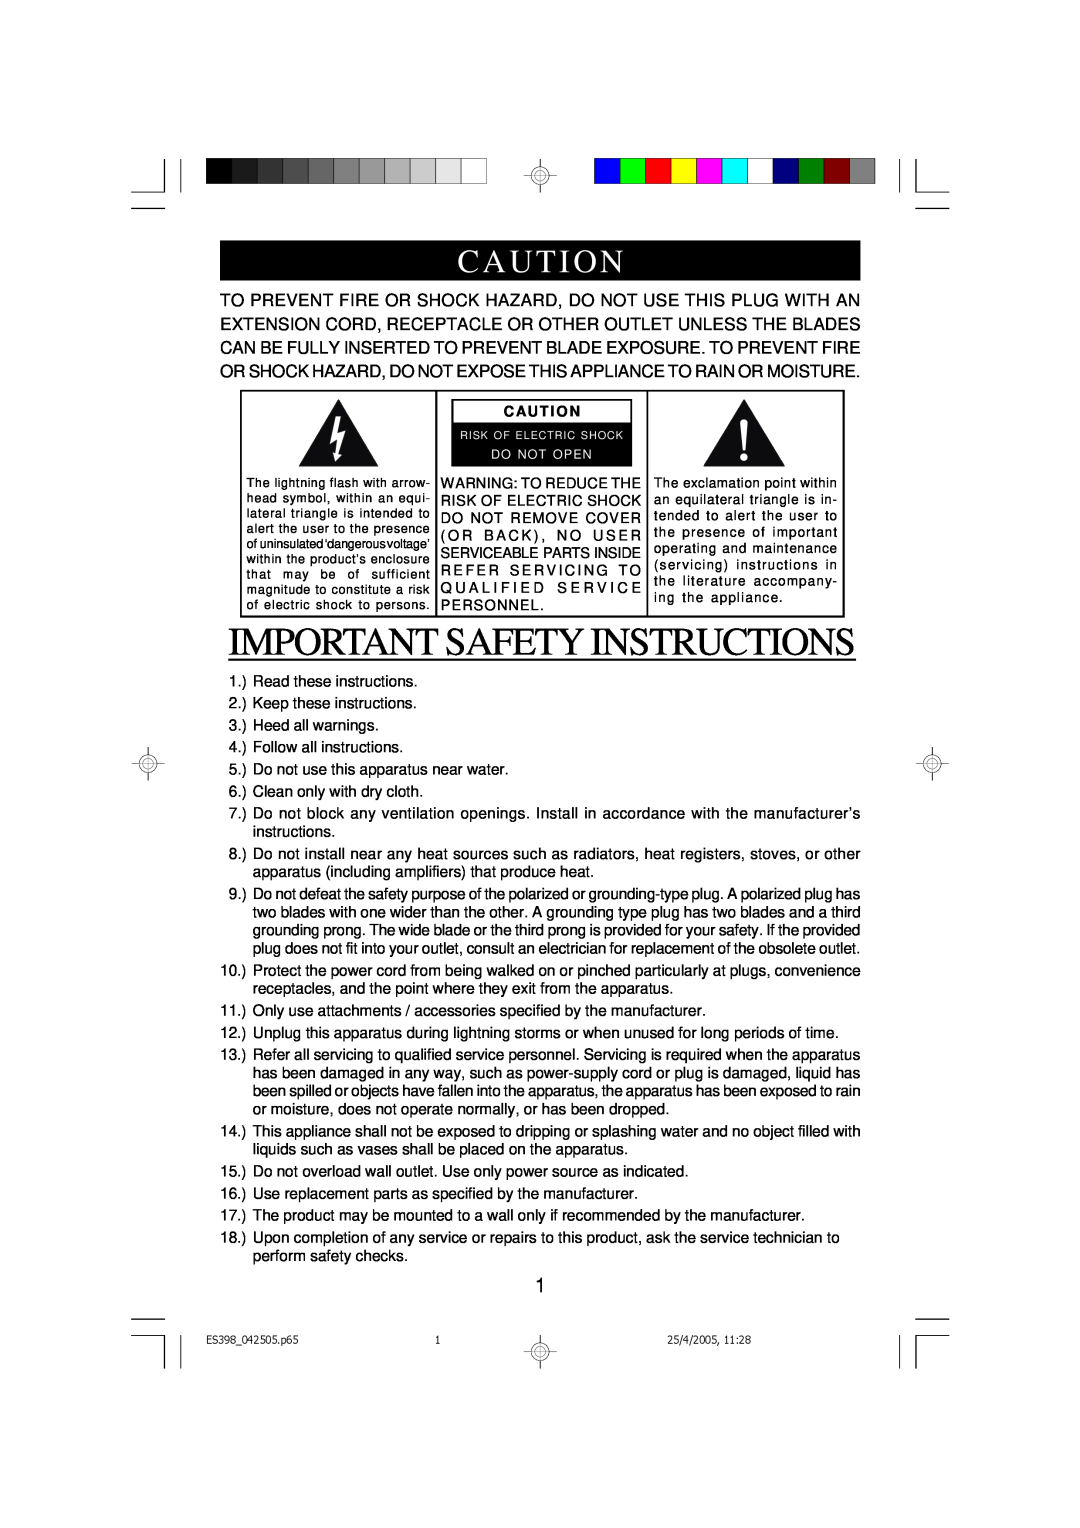 Emerson ES398 owner manual Important Safety Instructions, Caut I On, Caut I O N 